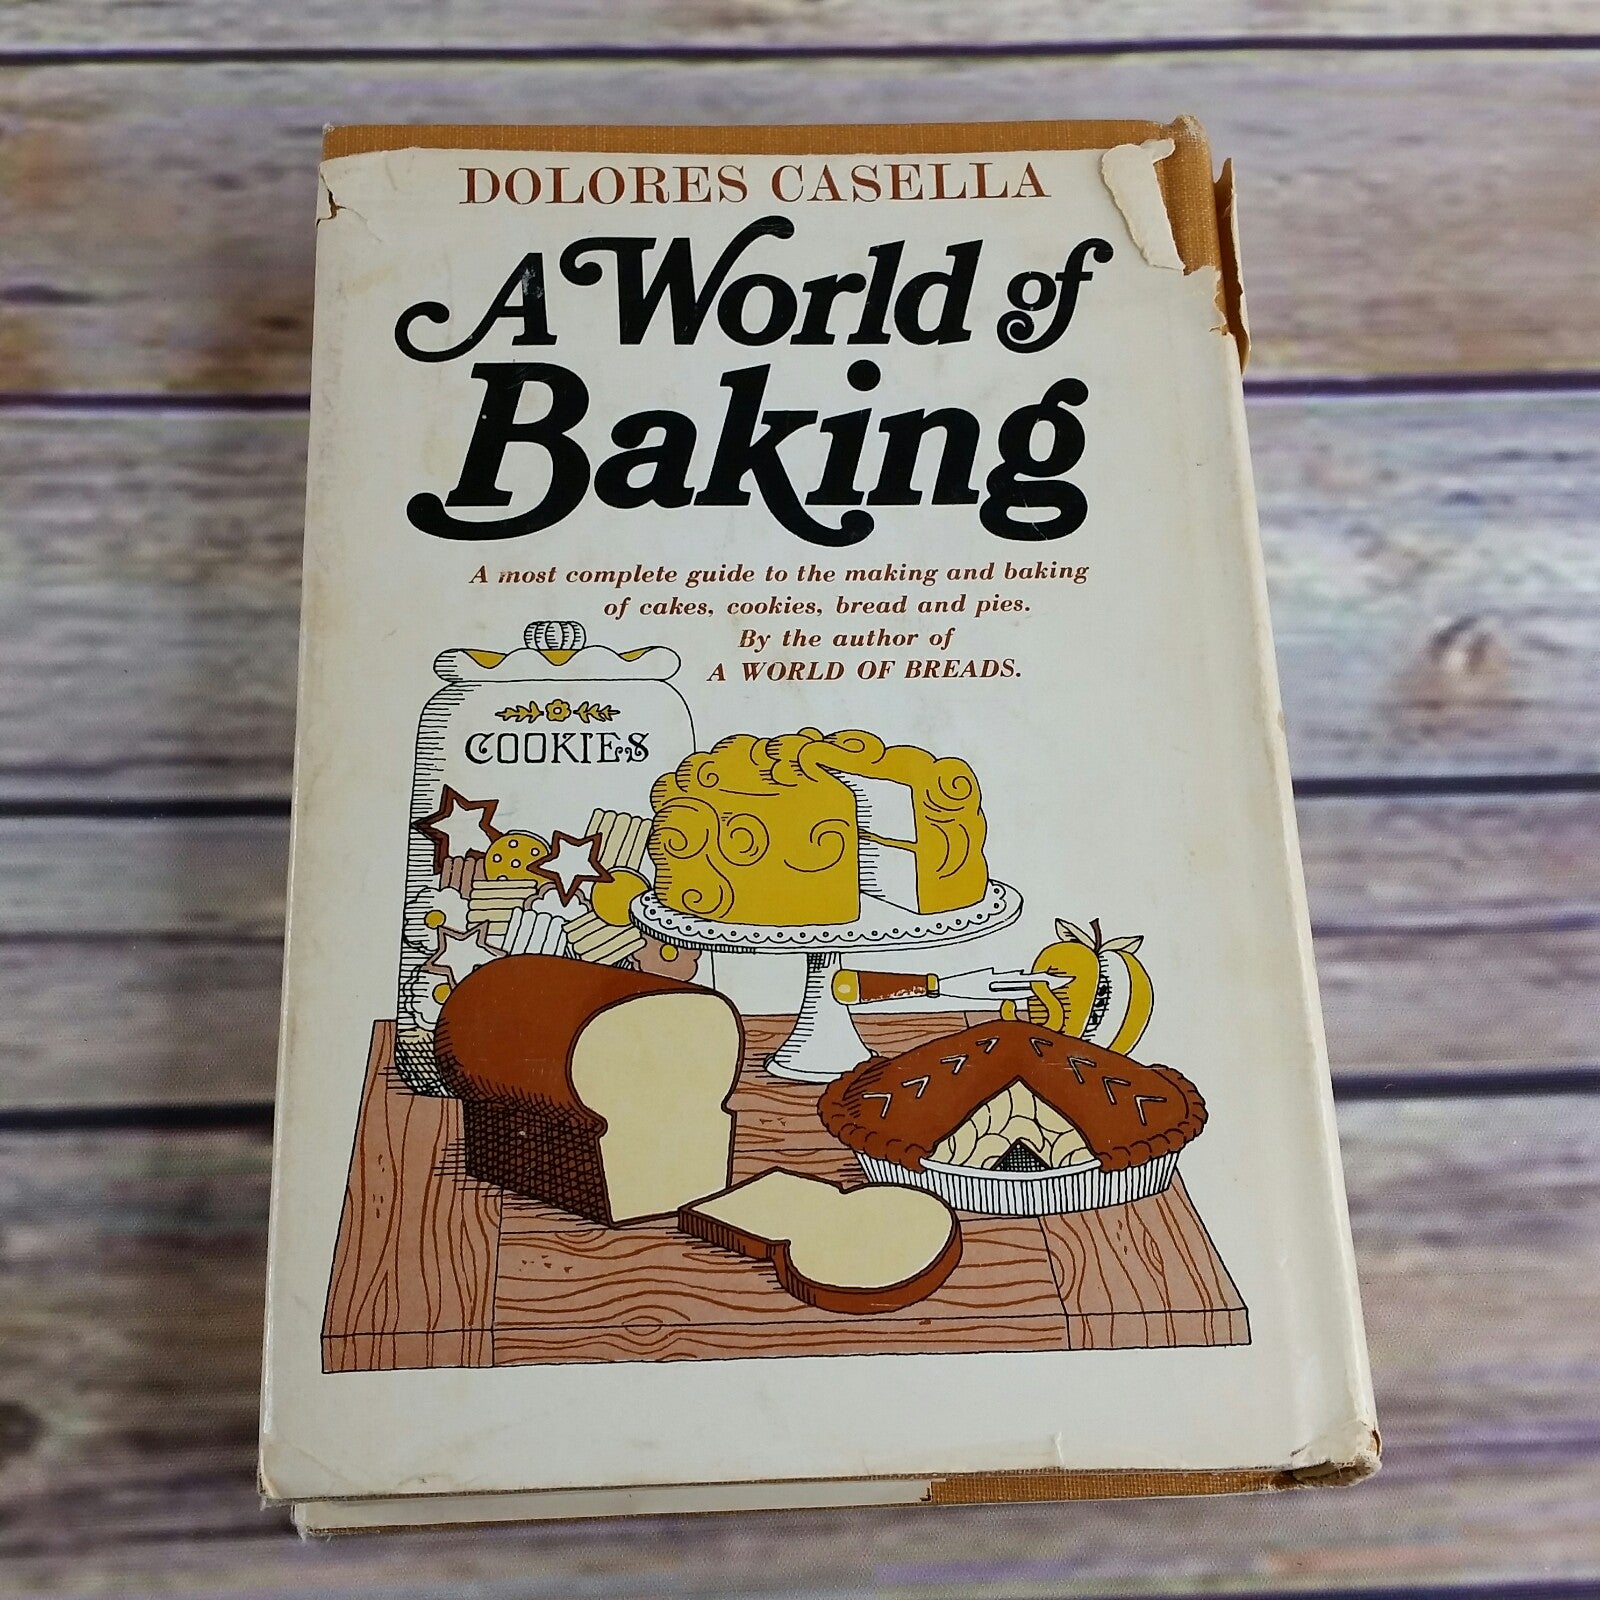 Vintage Cookbook A World of Baking 1968 Complete Guide Cake Cookies Bread Pie Recipes Hardcover Dolores Casella - At Grandma's Table